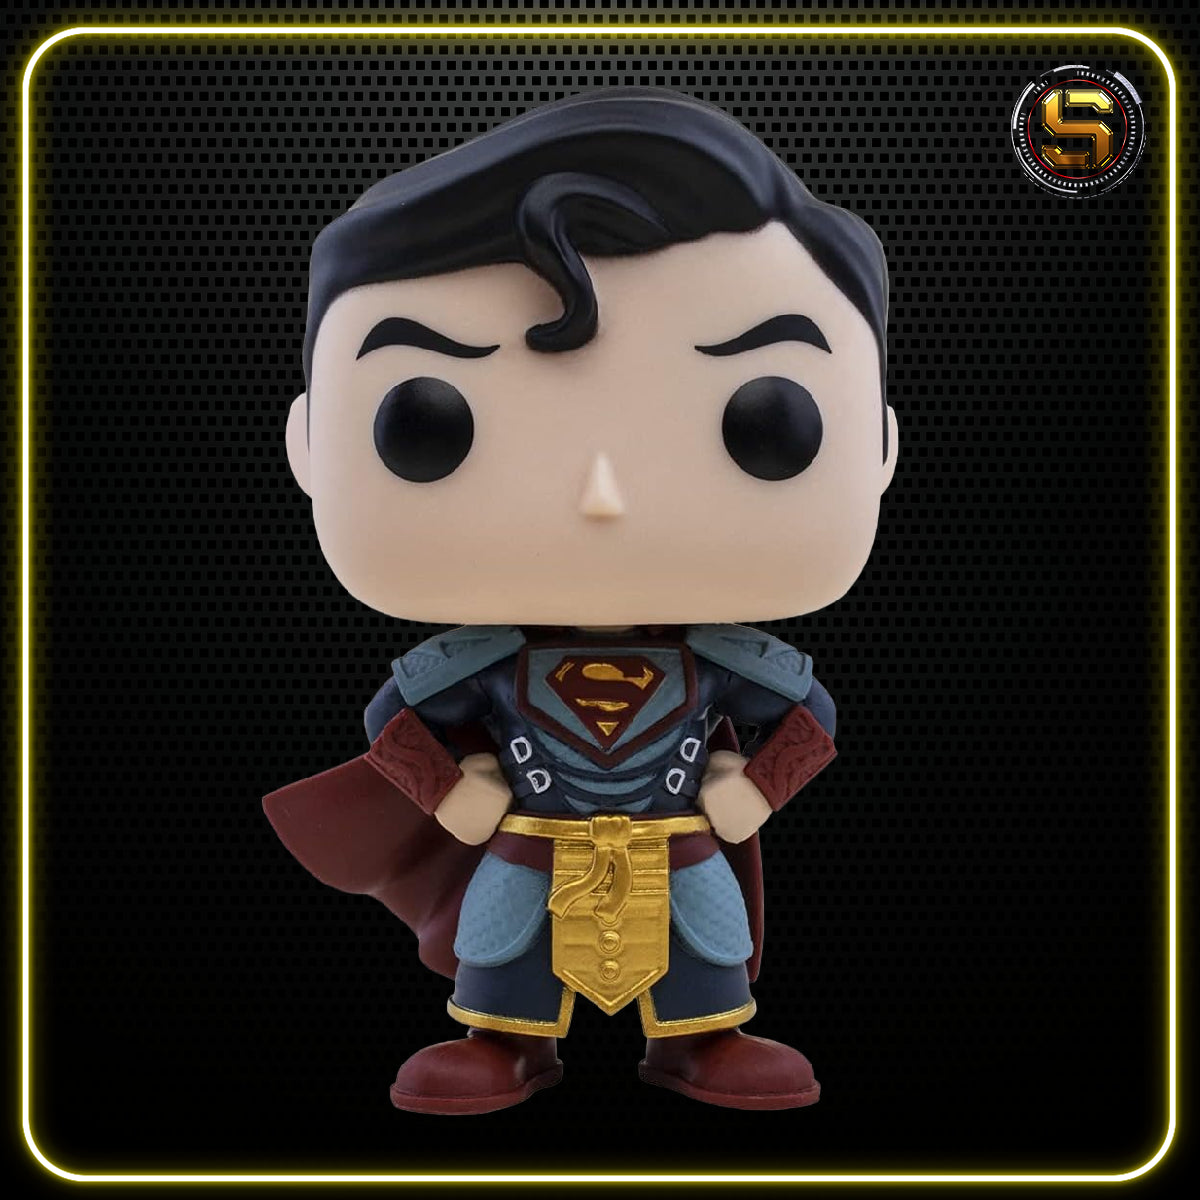 FUNKO POP DC HEROES IMPERIAL PALACE SUPERMAN 402